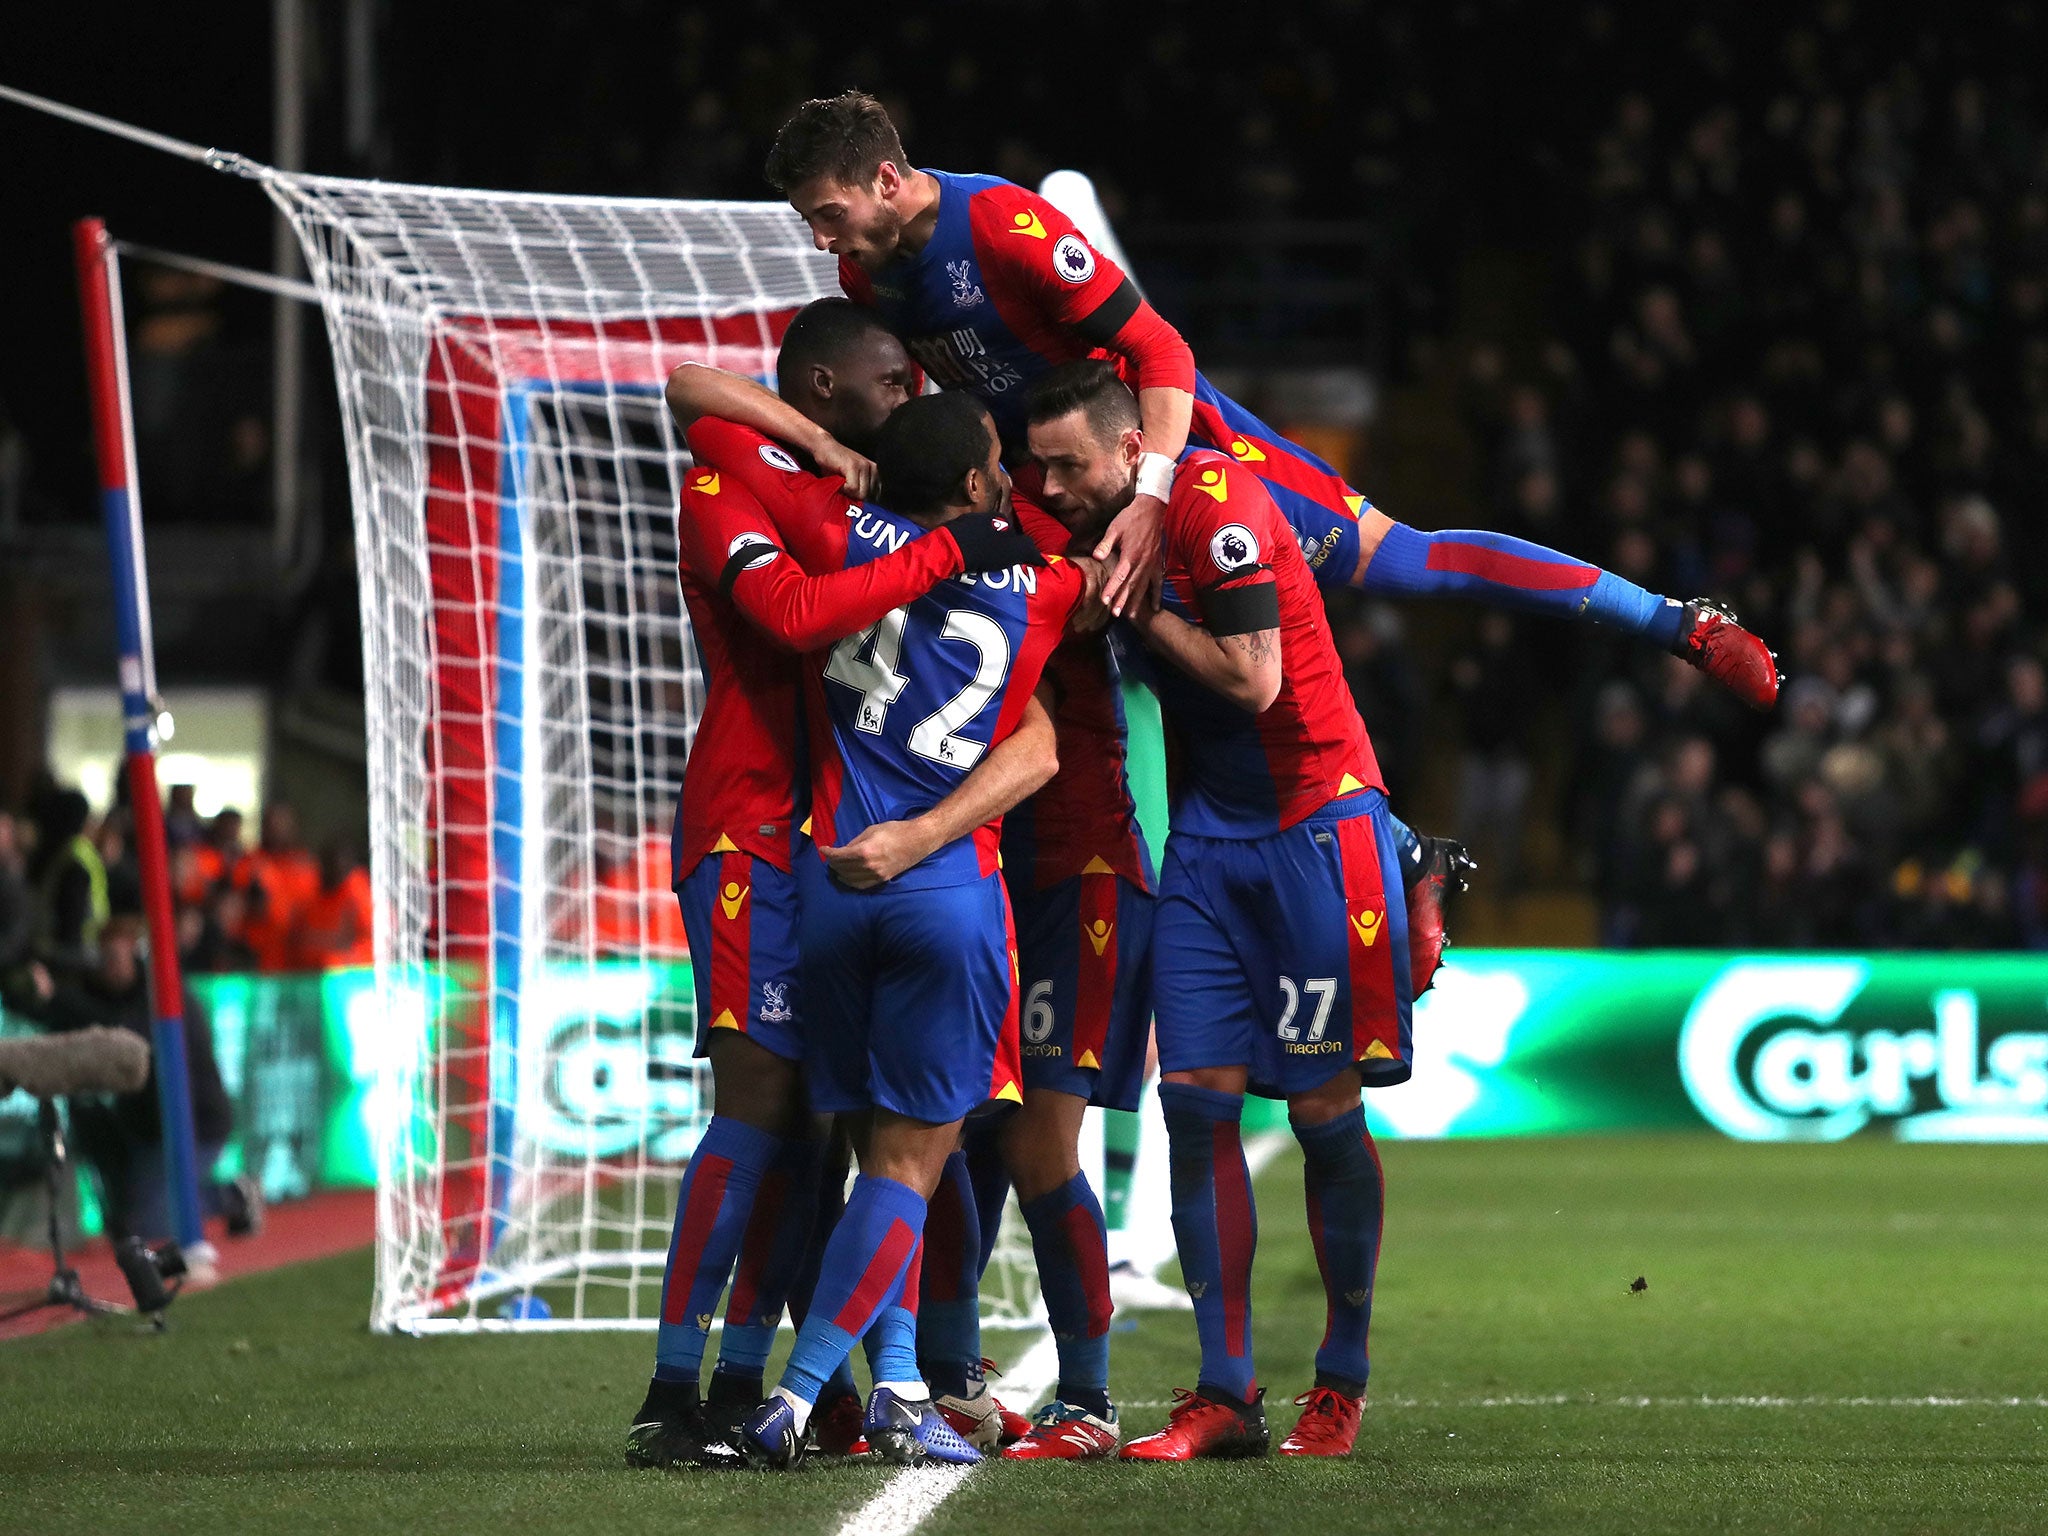 Palace secured their first win in eight matches